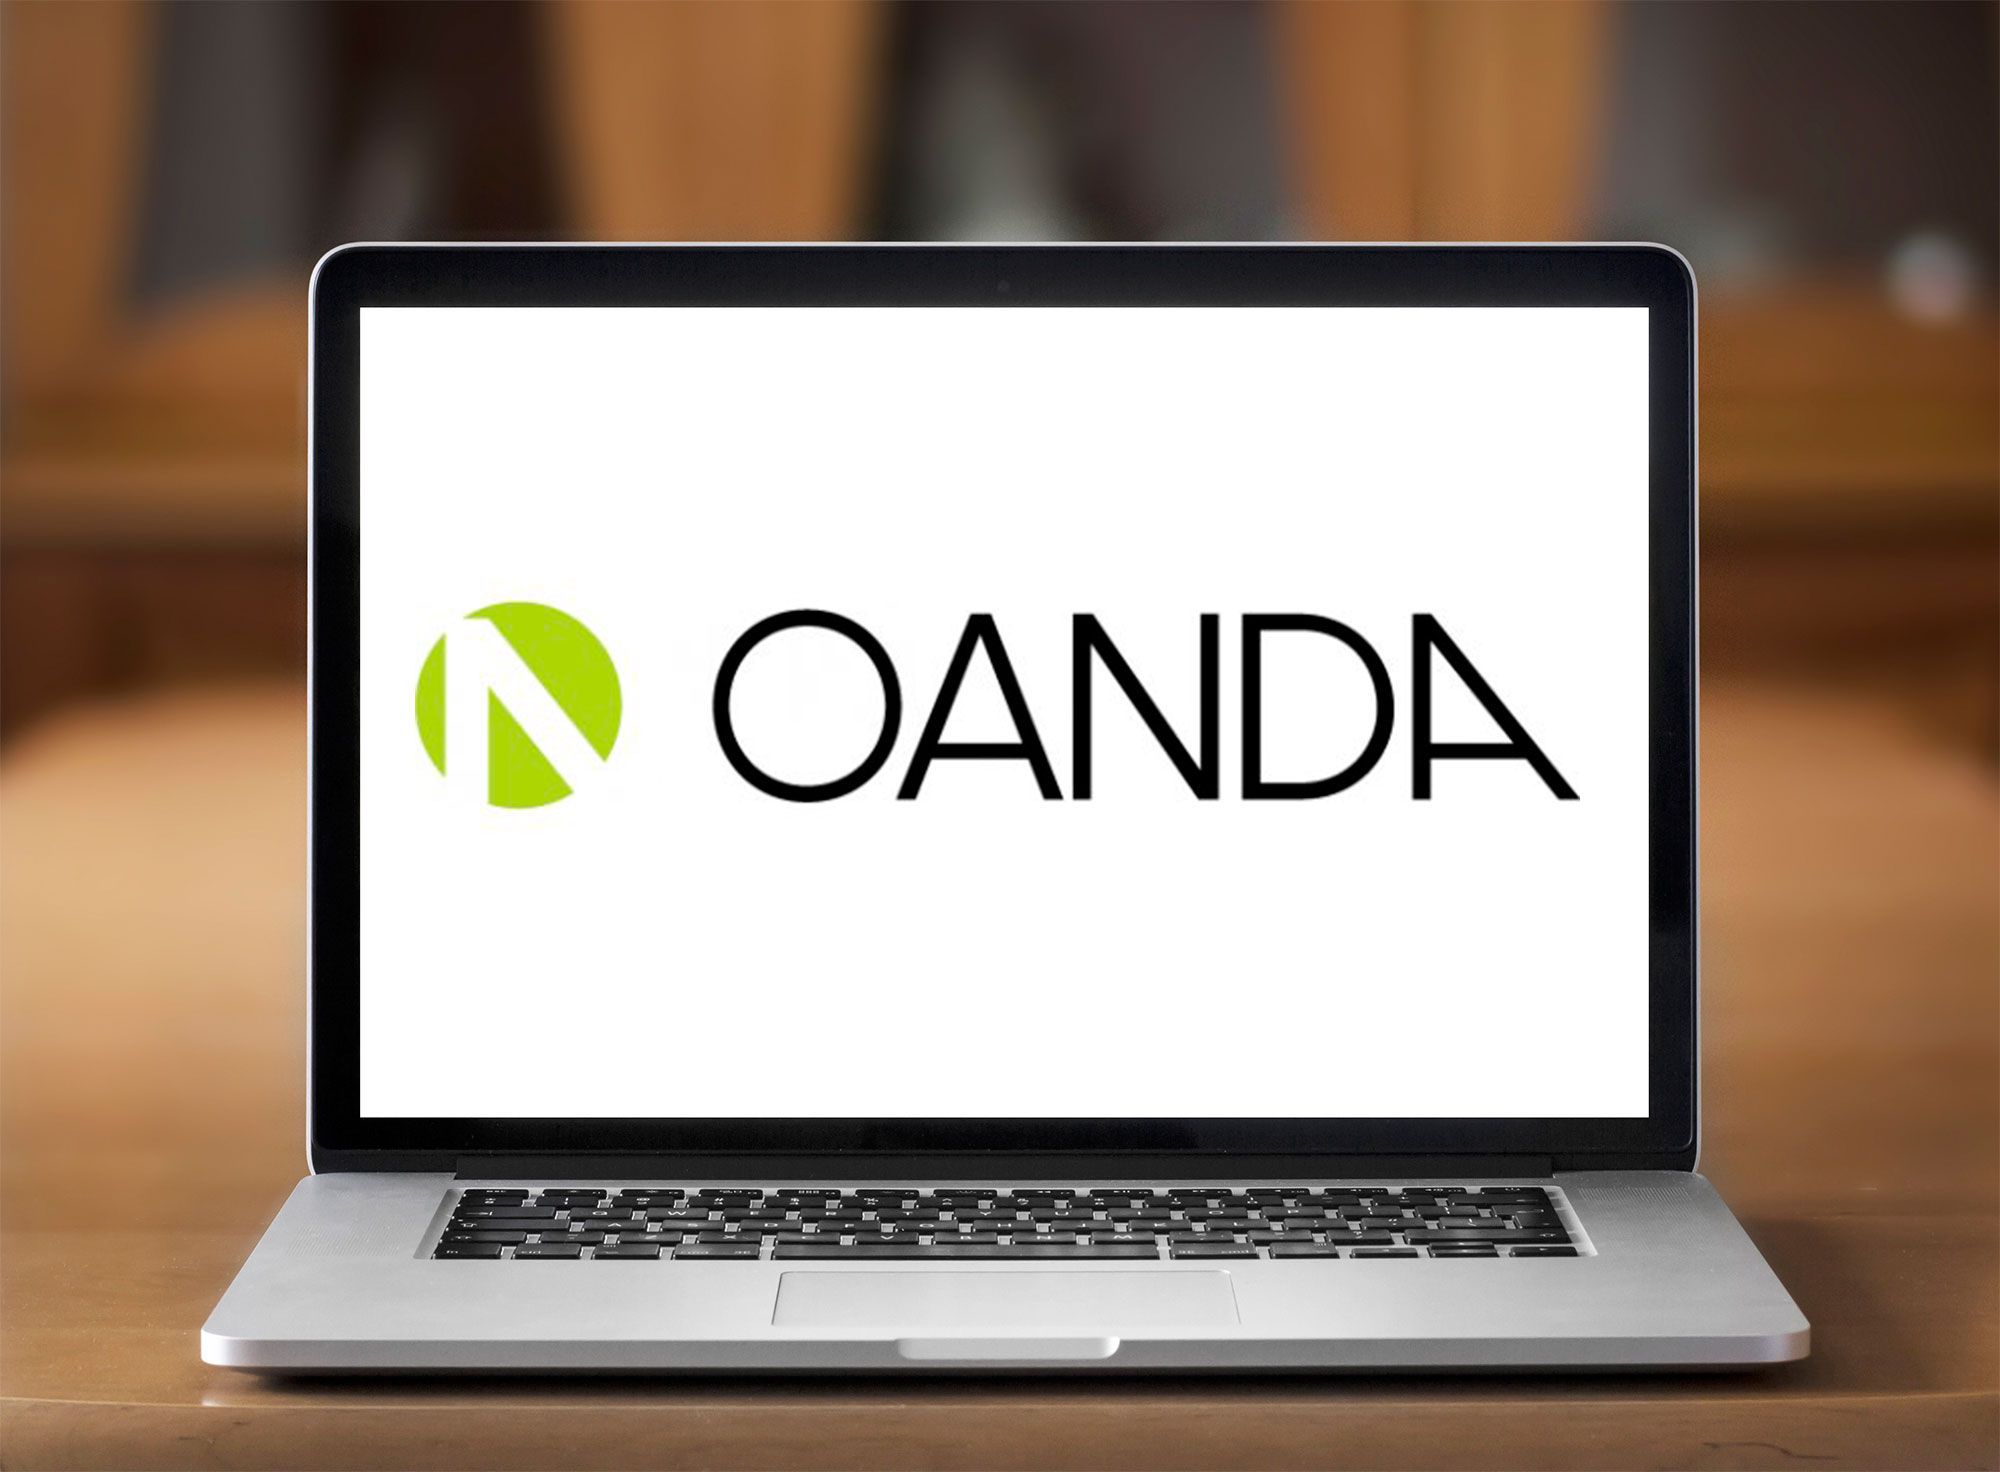 OANDA launches operations in Europe from new base in Poland